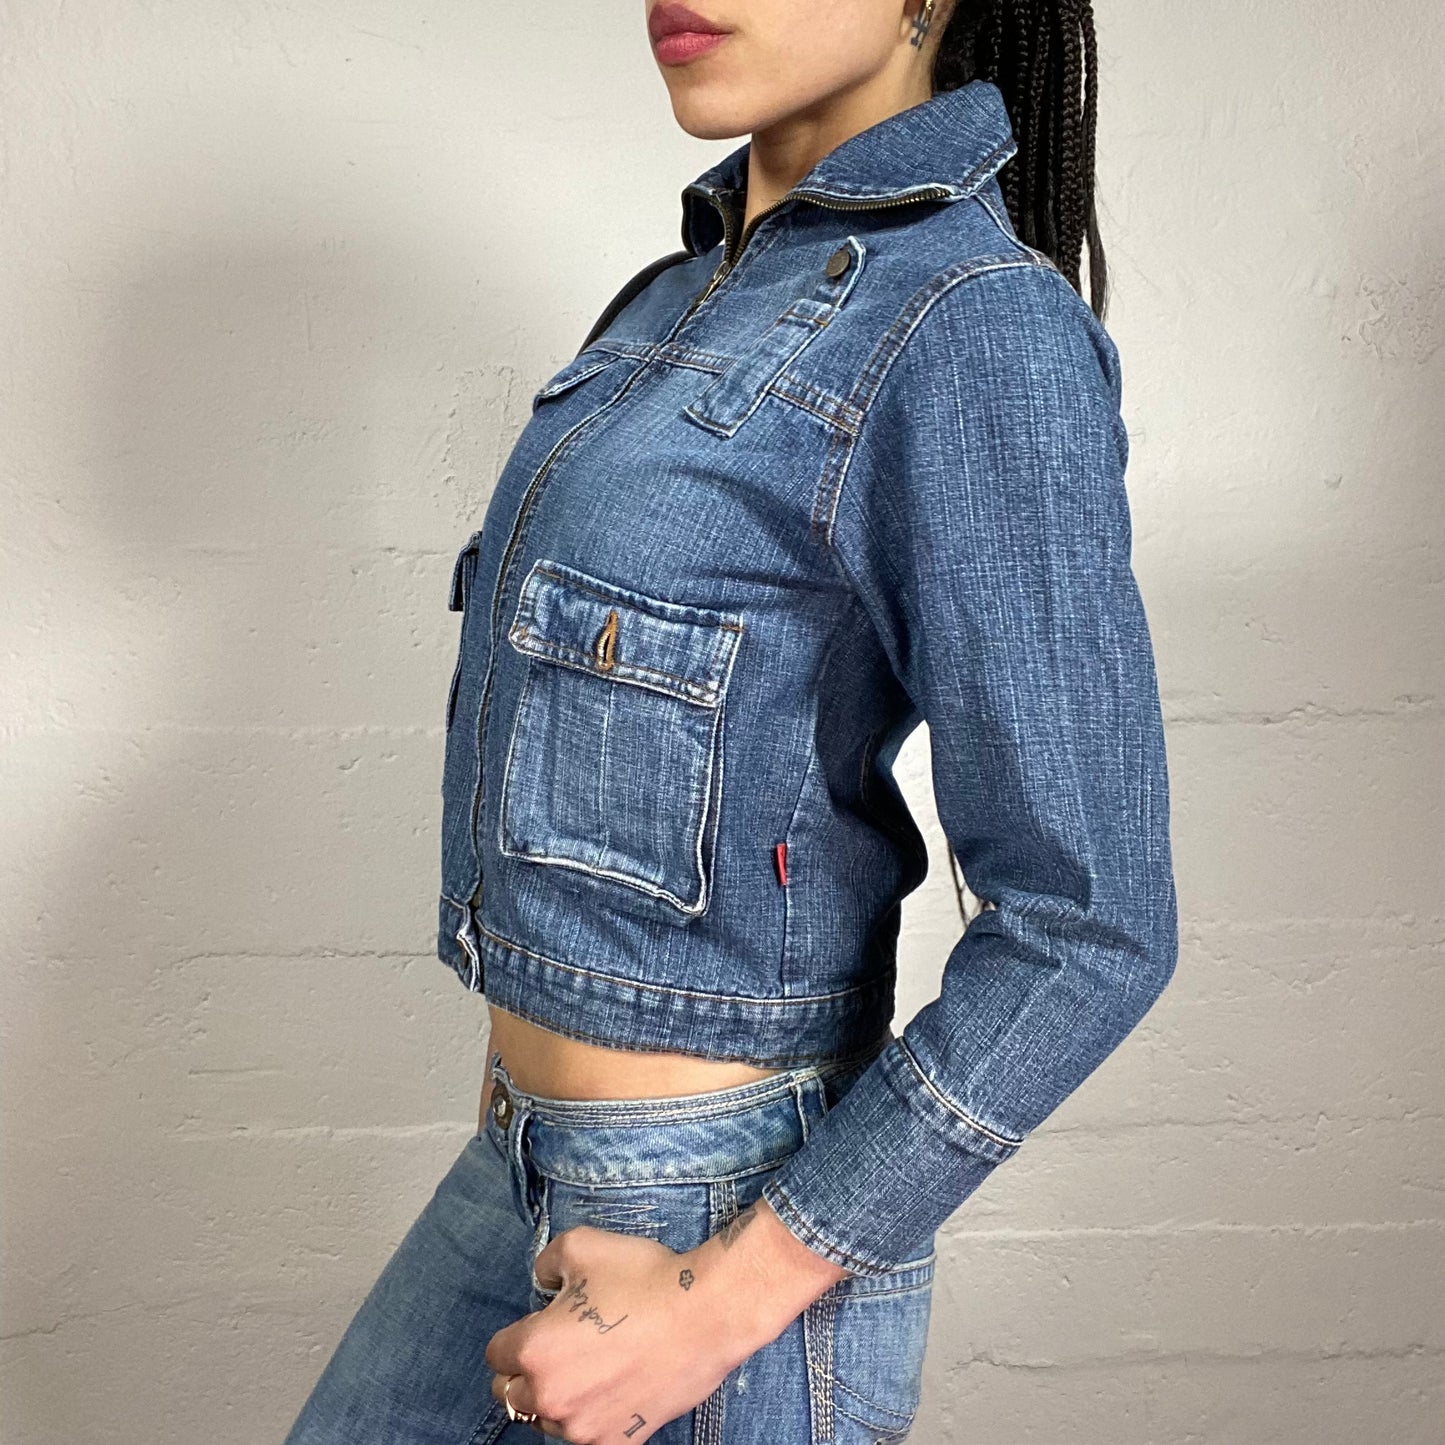 Vintage 2000’s Downtown Girl Classic Blue Zip Up Collared Denim Jacket with Pocket Details (S)